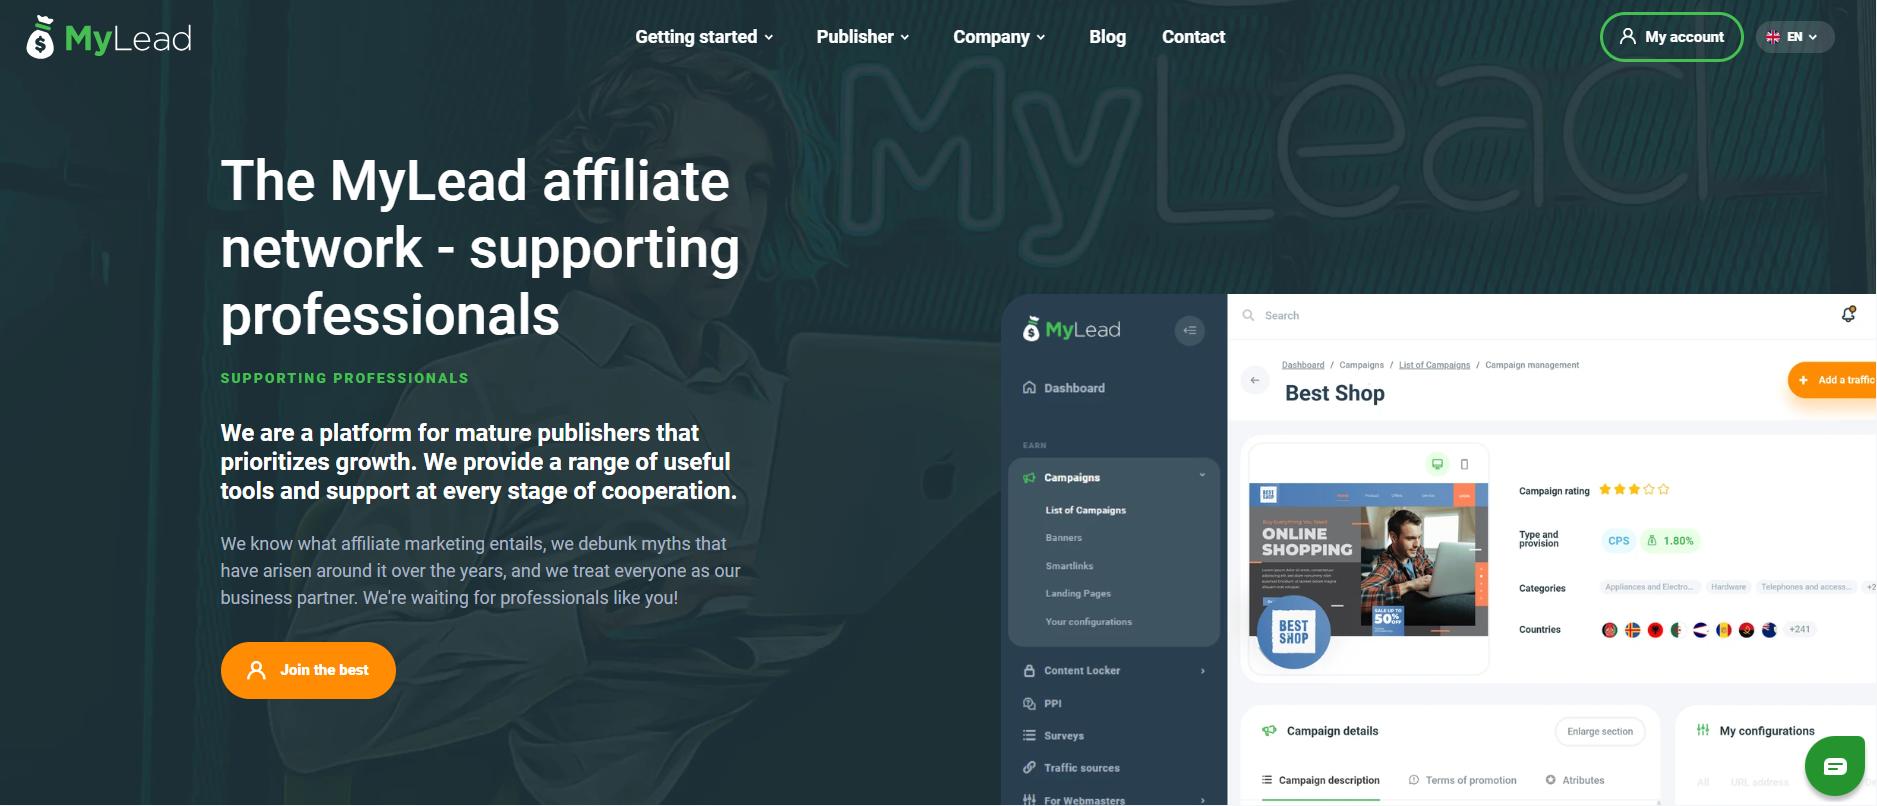 Affiliate network offering outstanding Offerwall Rewards capable of boosting ad revenue by up to 33%